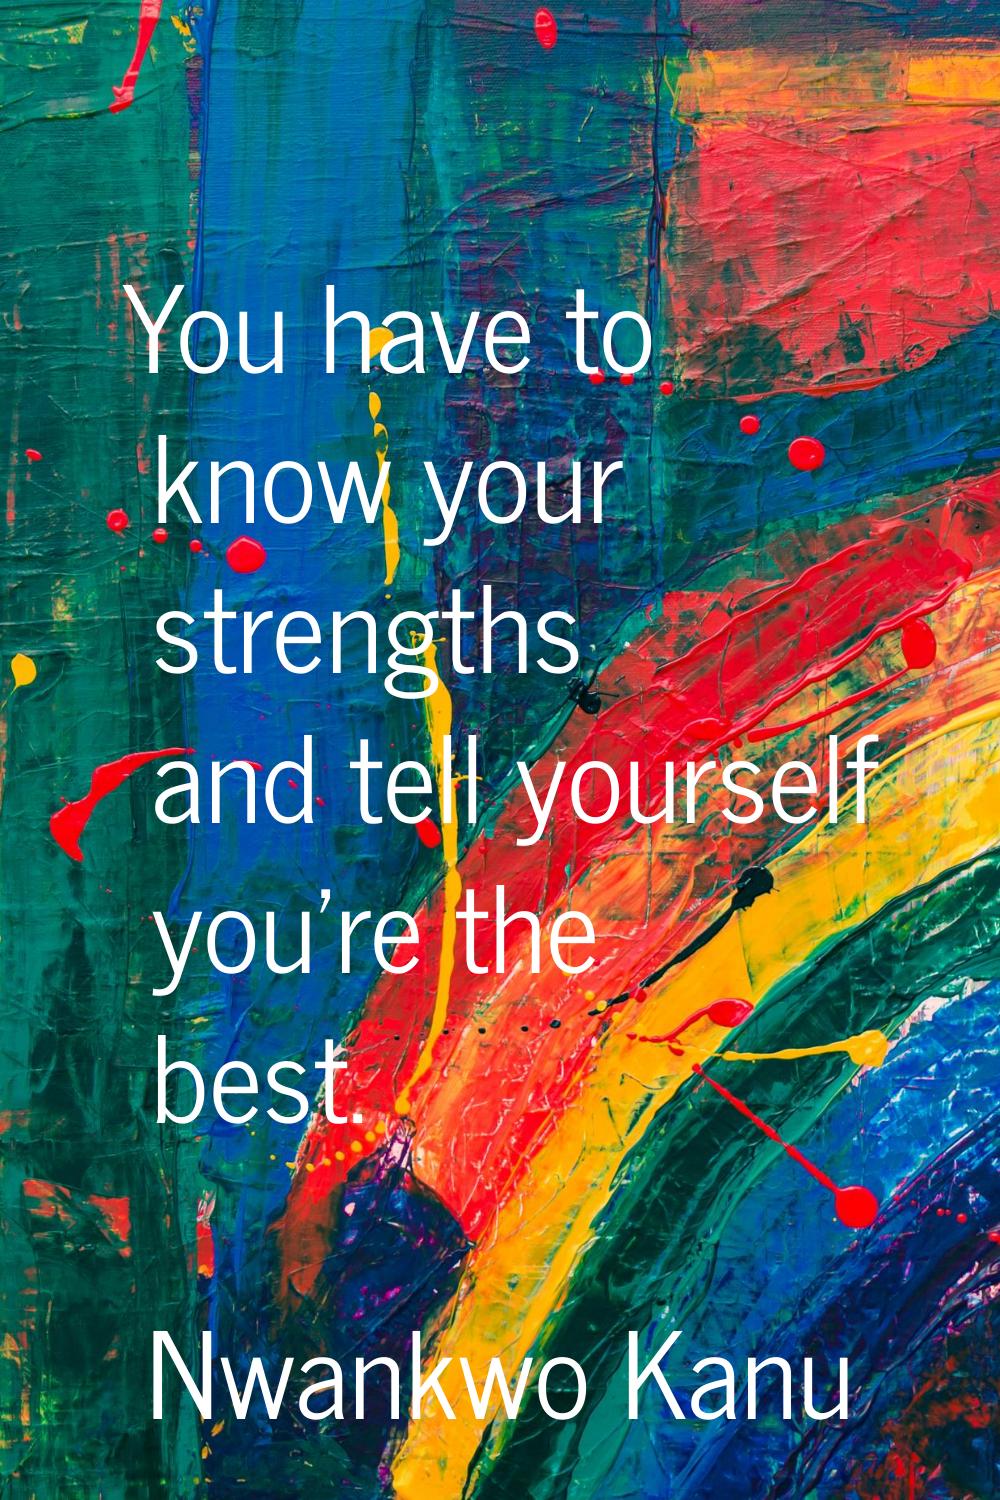 You have to know your strengths and tell yourself you're the best.